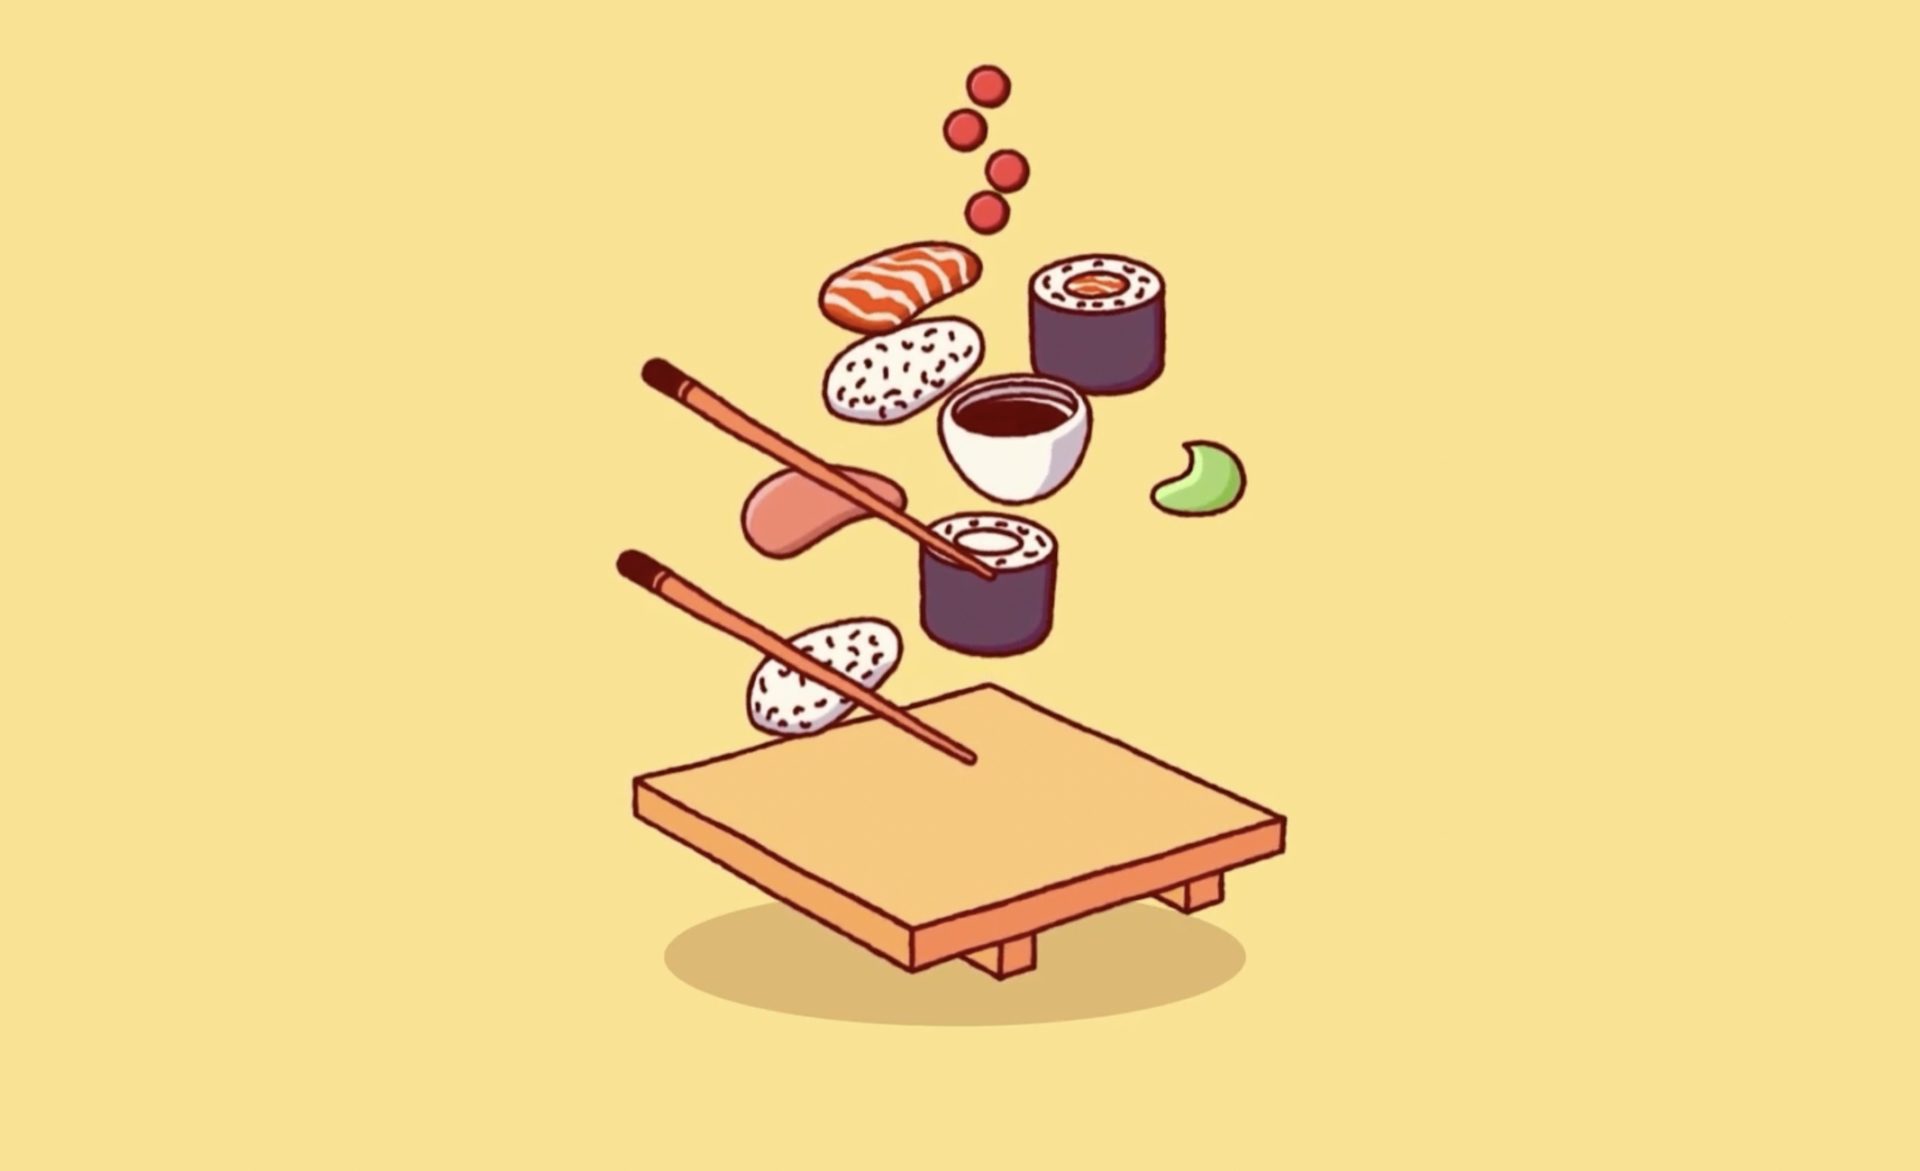 A frozen frame of an animation against a yellow background. Various parts of a sushi dinner – chopsticks, maki rolls, nigiri, and a little bowl of soy sauce – float over a wooden sushi tray.